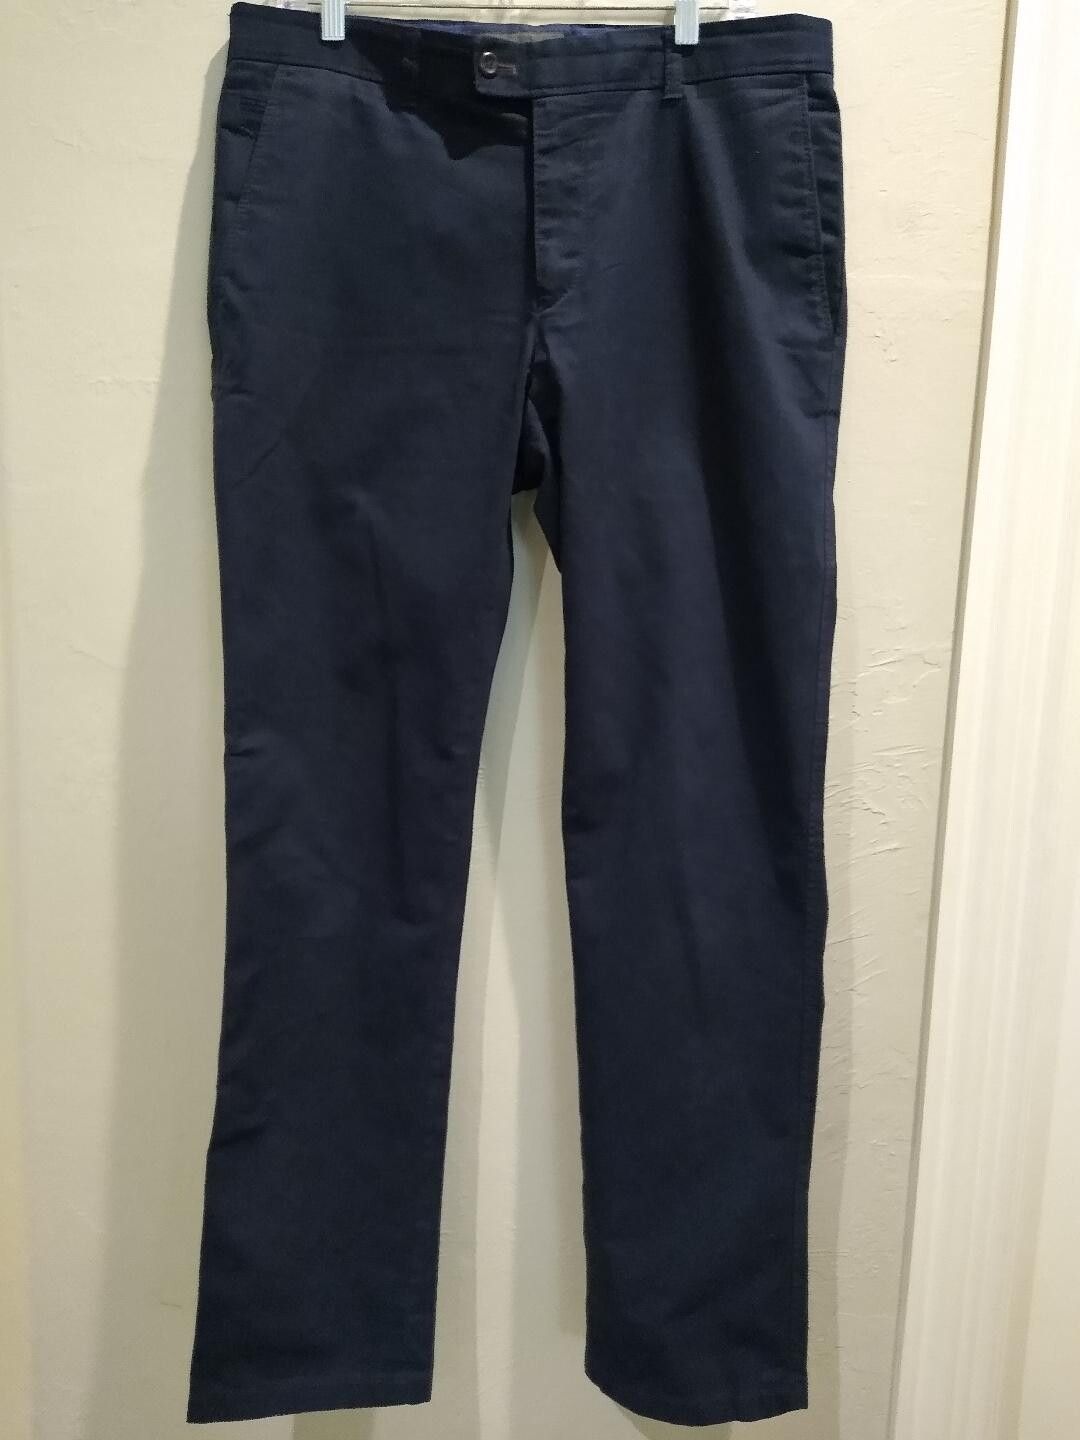 Brax Evans Style Flat Front Zip Fly Chino Pants | Grailed